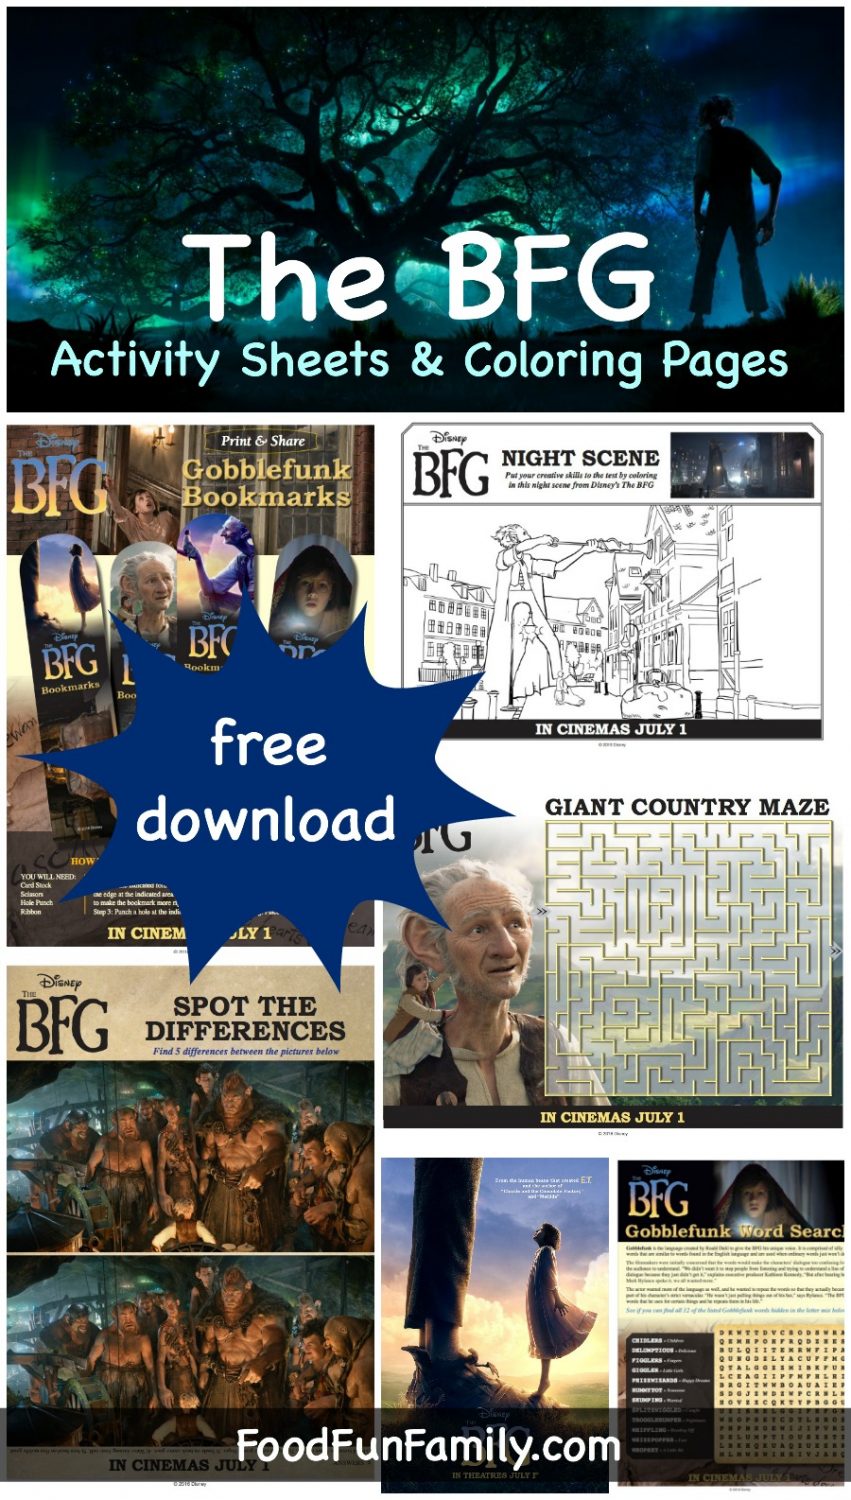 Disney's The BFG Activity sheets and Coloring pages - free printables for kids!